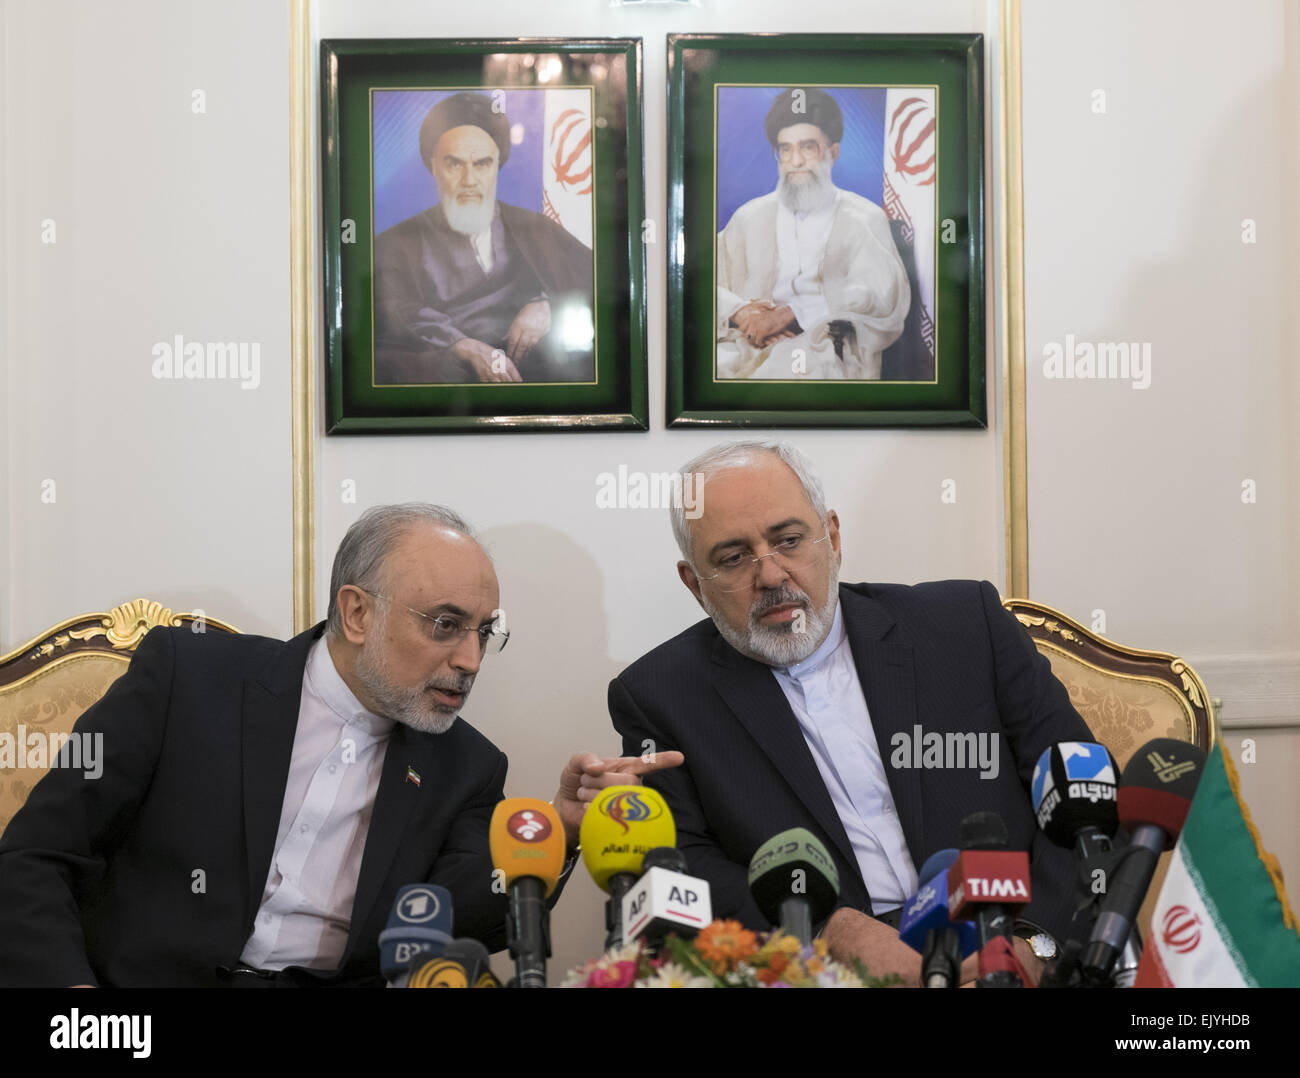 Tehran, Iran. 3rd Apr, 2015. Members of Iran's nuclear negotiation team with world powers in Lausanne, Foreign Minister MOHAMMAD JAVAD ZARIF (R), and The Head of Iran's Atomic Energy Organization, ALI AKBAR SALEHI speak with each other as they attend for speaking with media after arrive Tehran's Mehrabad airport.  Credit:  Morteza Nikoubazl/ZUMA Wire/Alamy Live News Stock Photo